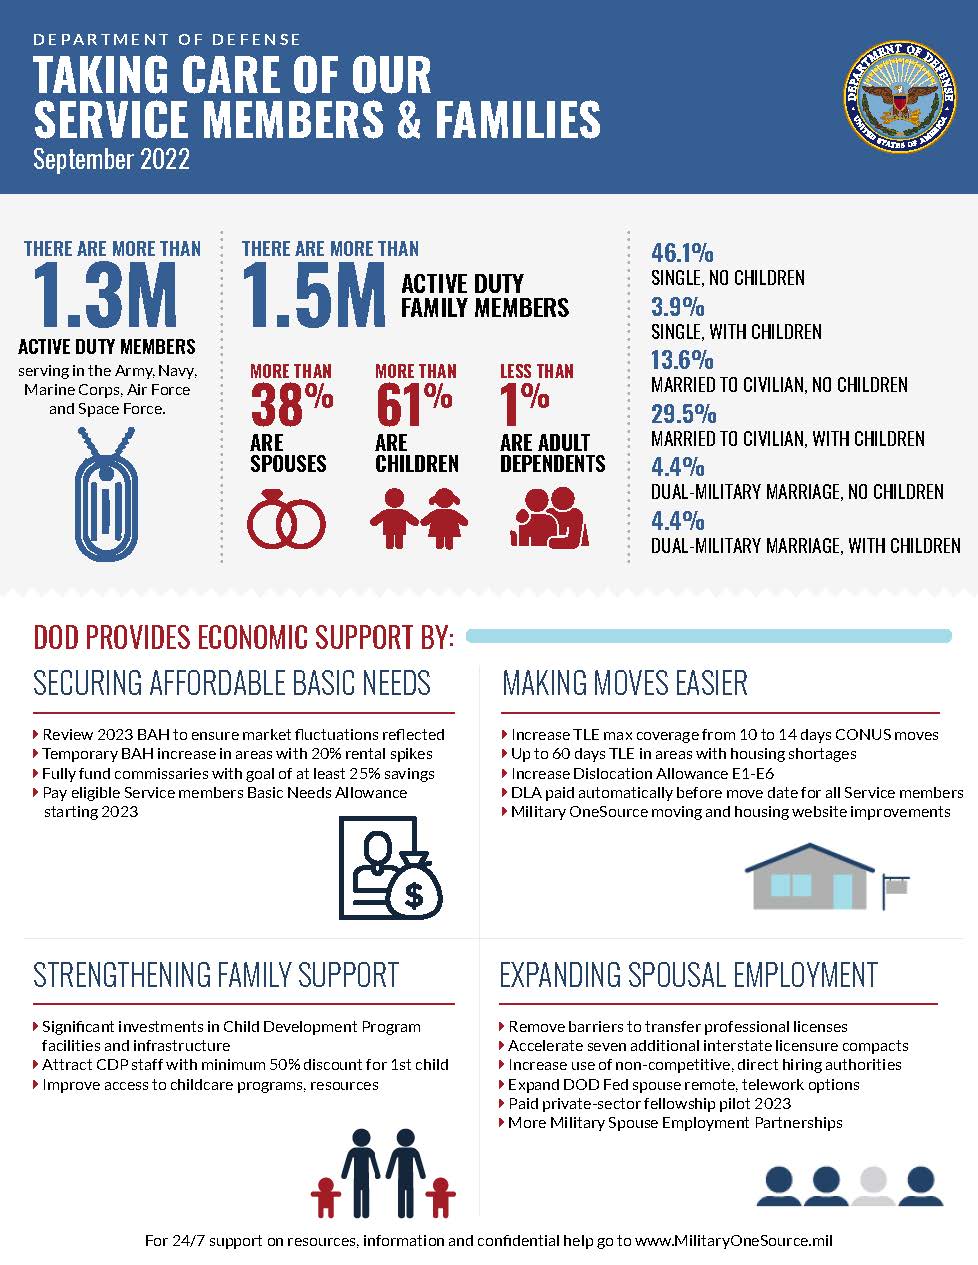 Taking Care of Our People 2022 Infographic